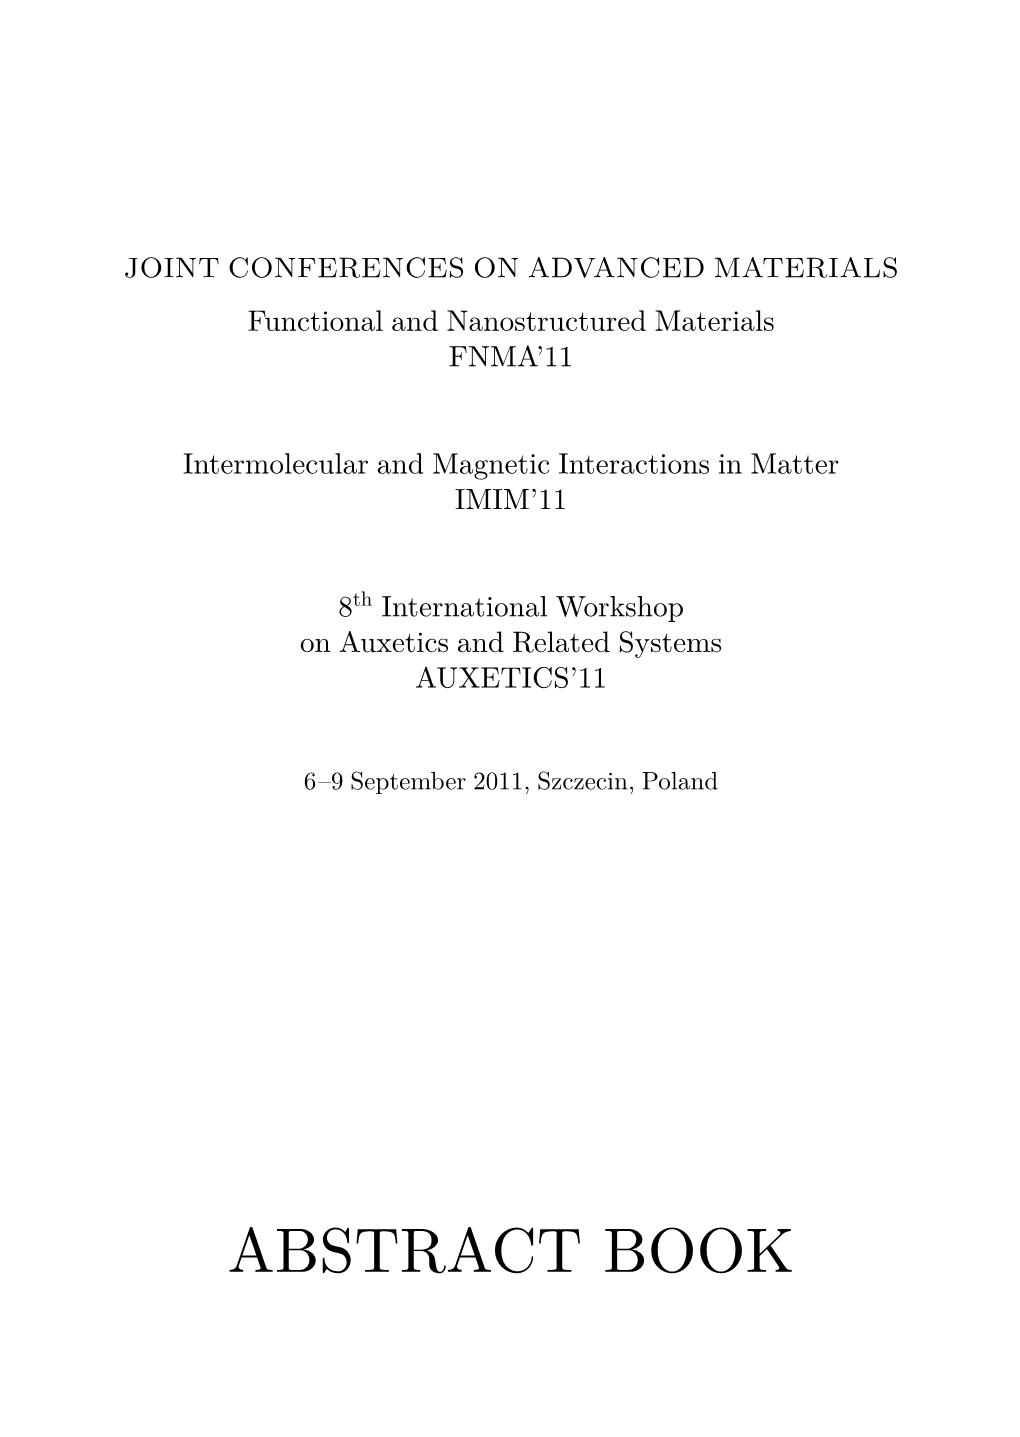 ABSTRACT BOOK TITLE Joint Conferences on Advanced Materials – Abstract Book